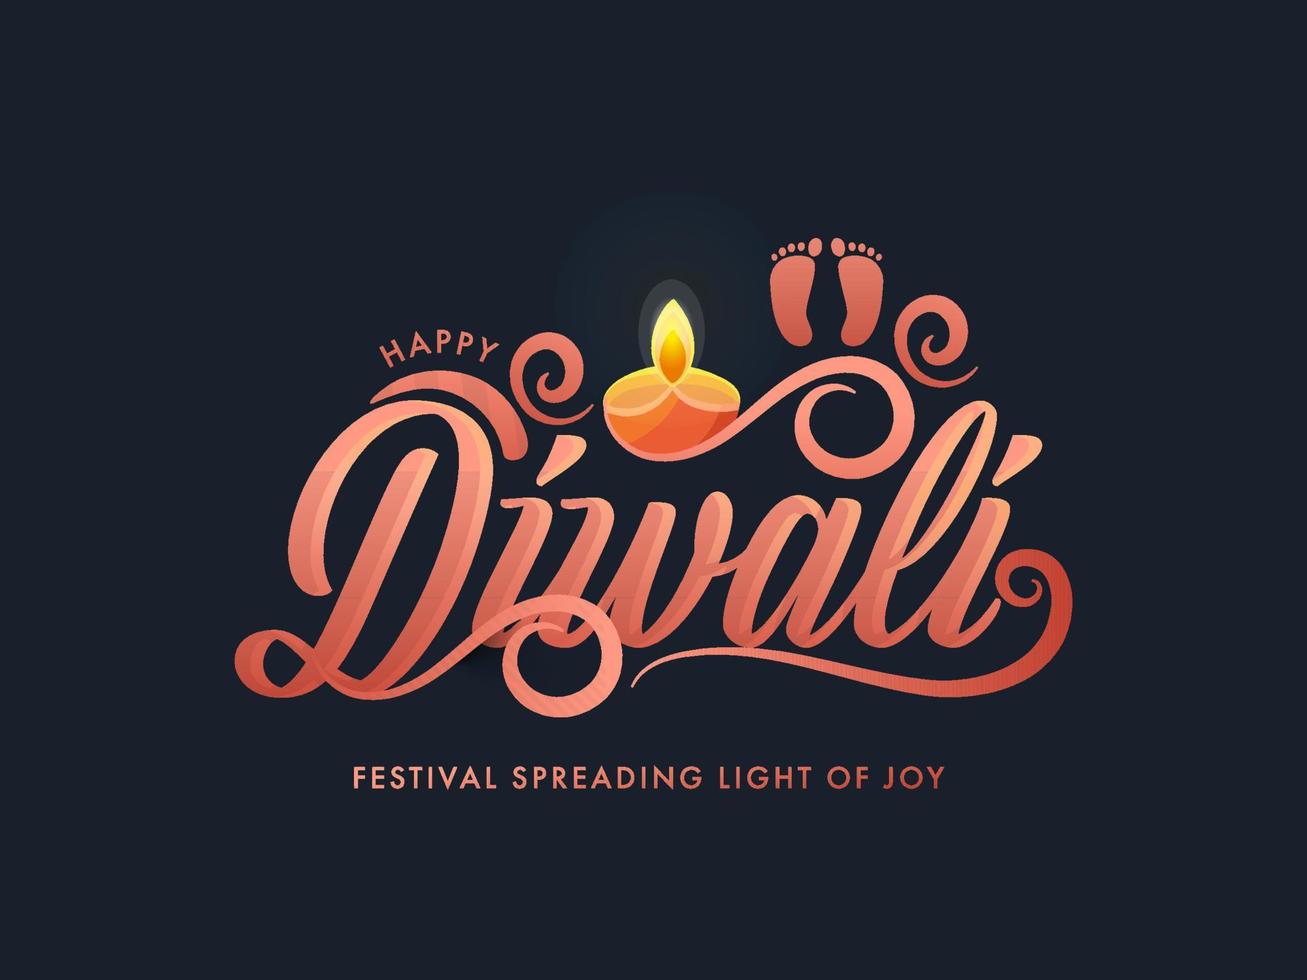 Happy Diwali Festival Spreading Light Of Joy Text With Goddess Footprint And Lit Oil Lamp On Dark Teal Blue Background. vector